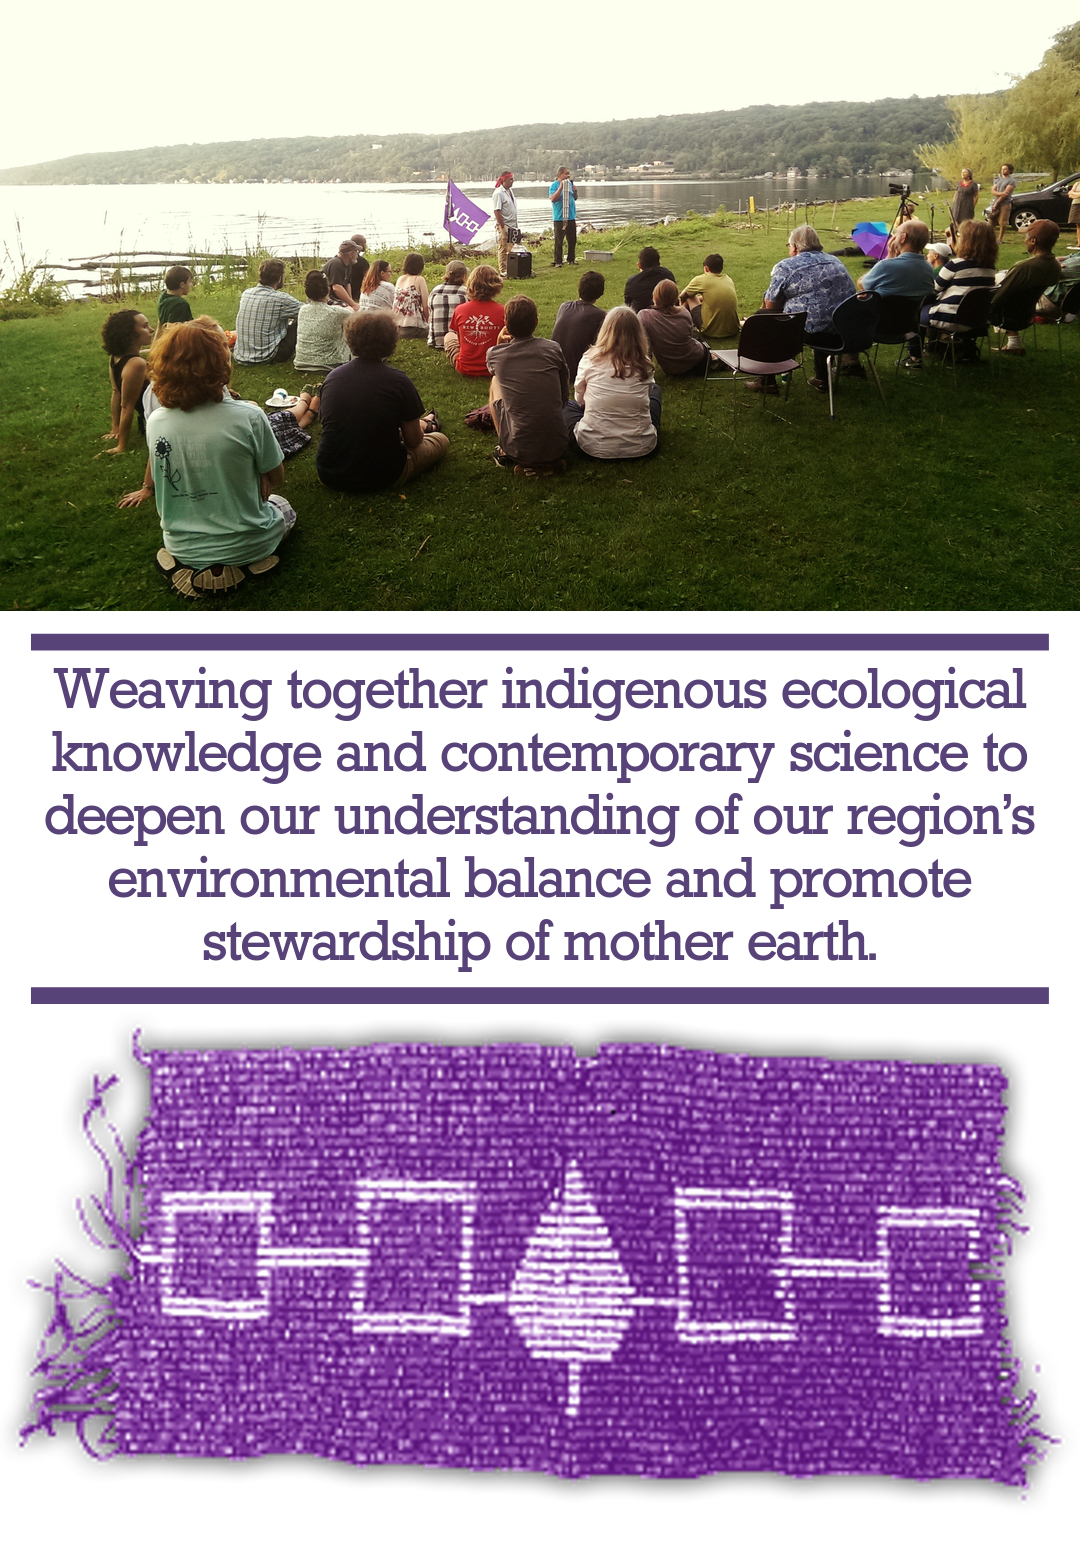 weaving together indigenous ecological knowledge and contemporary science to deepen our understand of our region's enviornmental balance and promote stewardship of earth